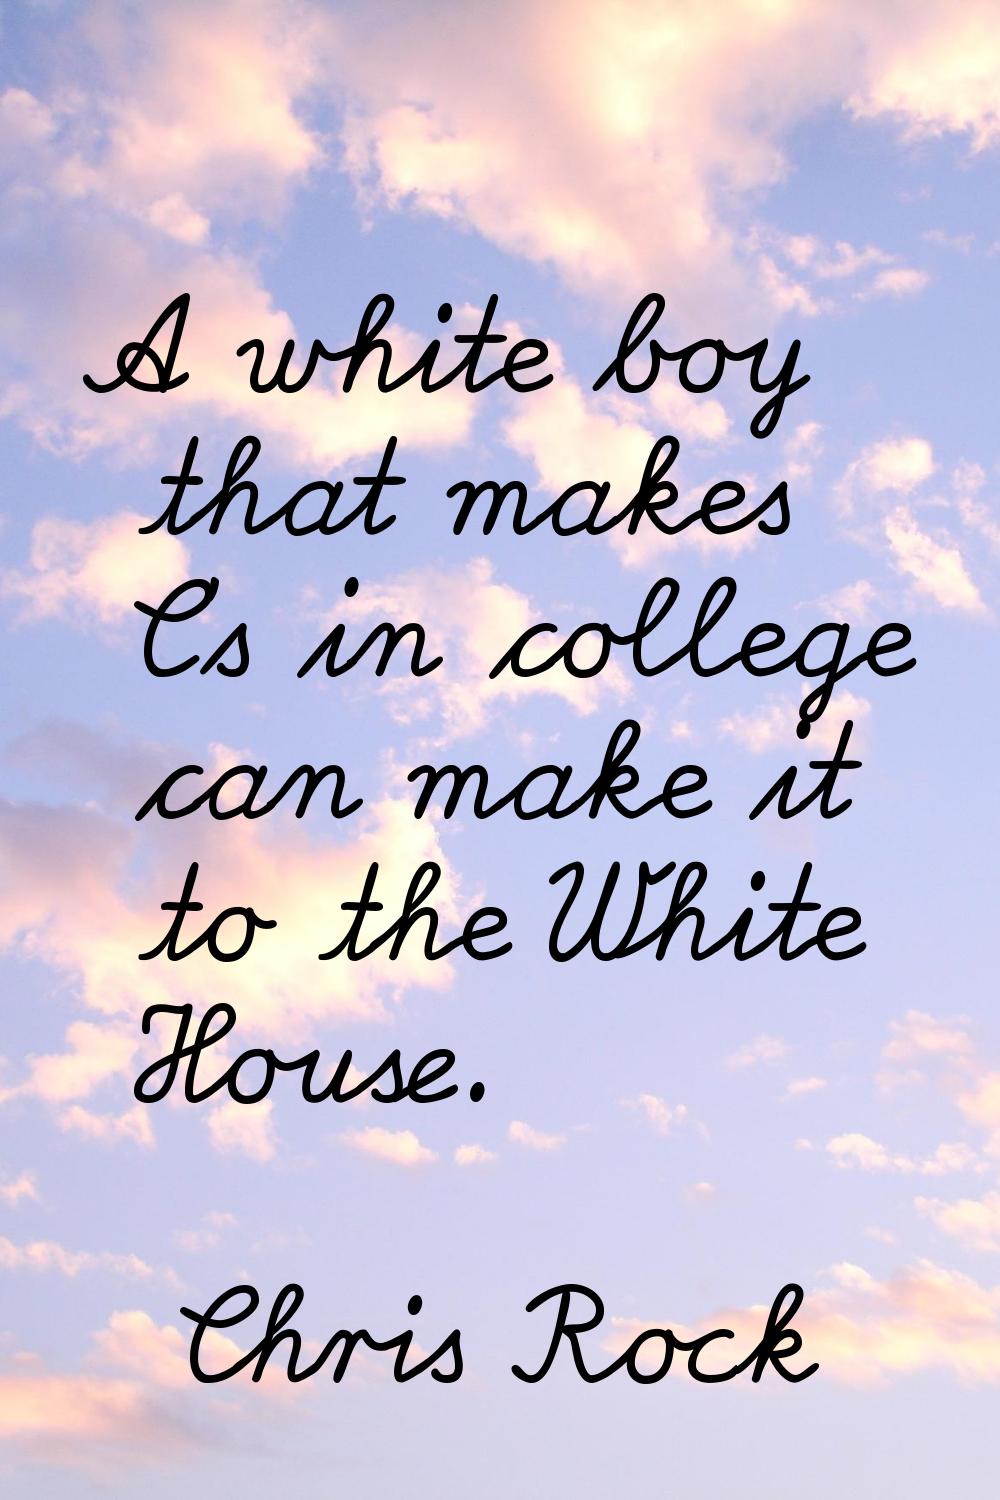 A white boy that makes C's in college can make it to the White House.